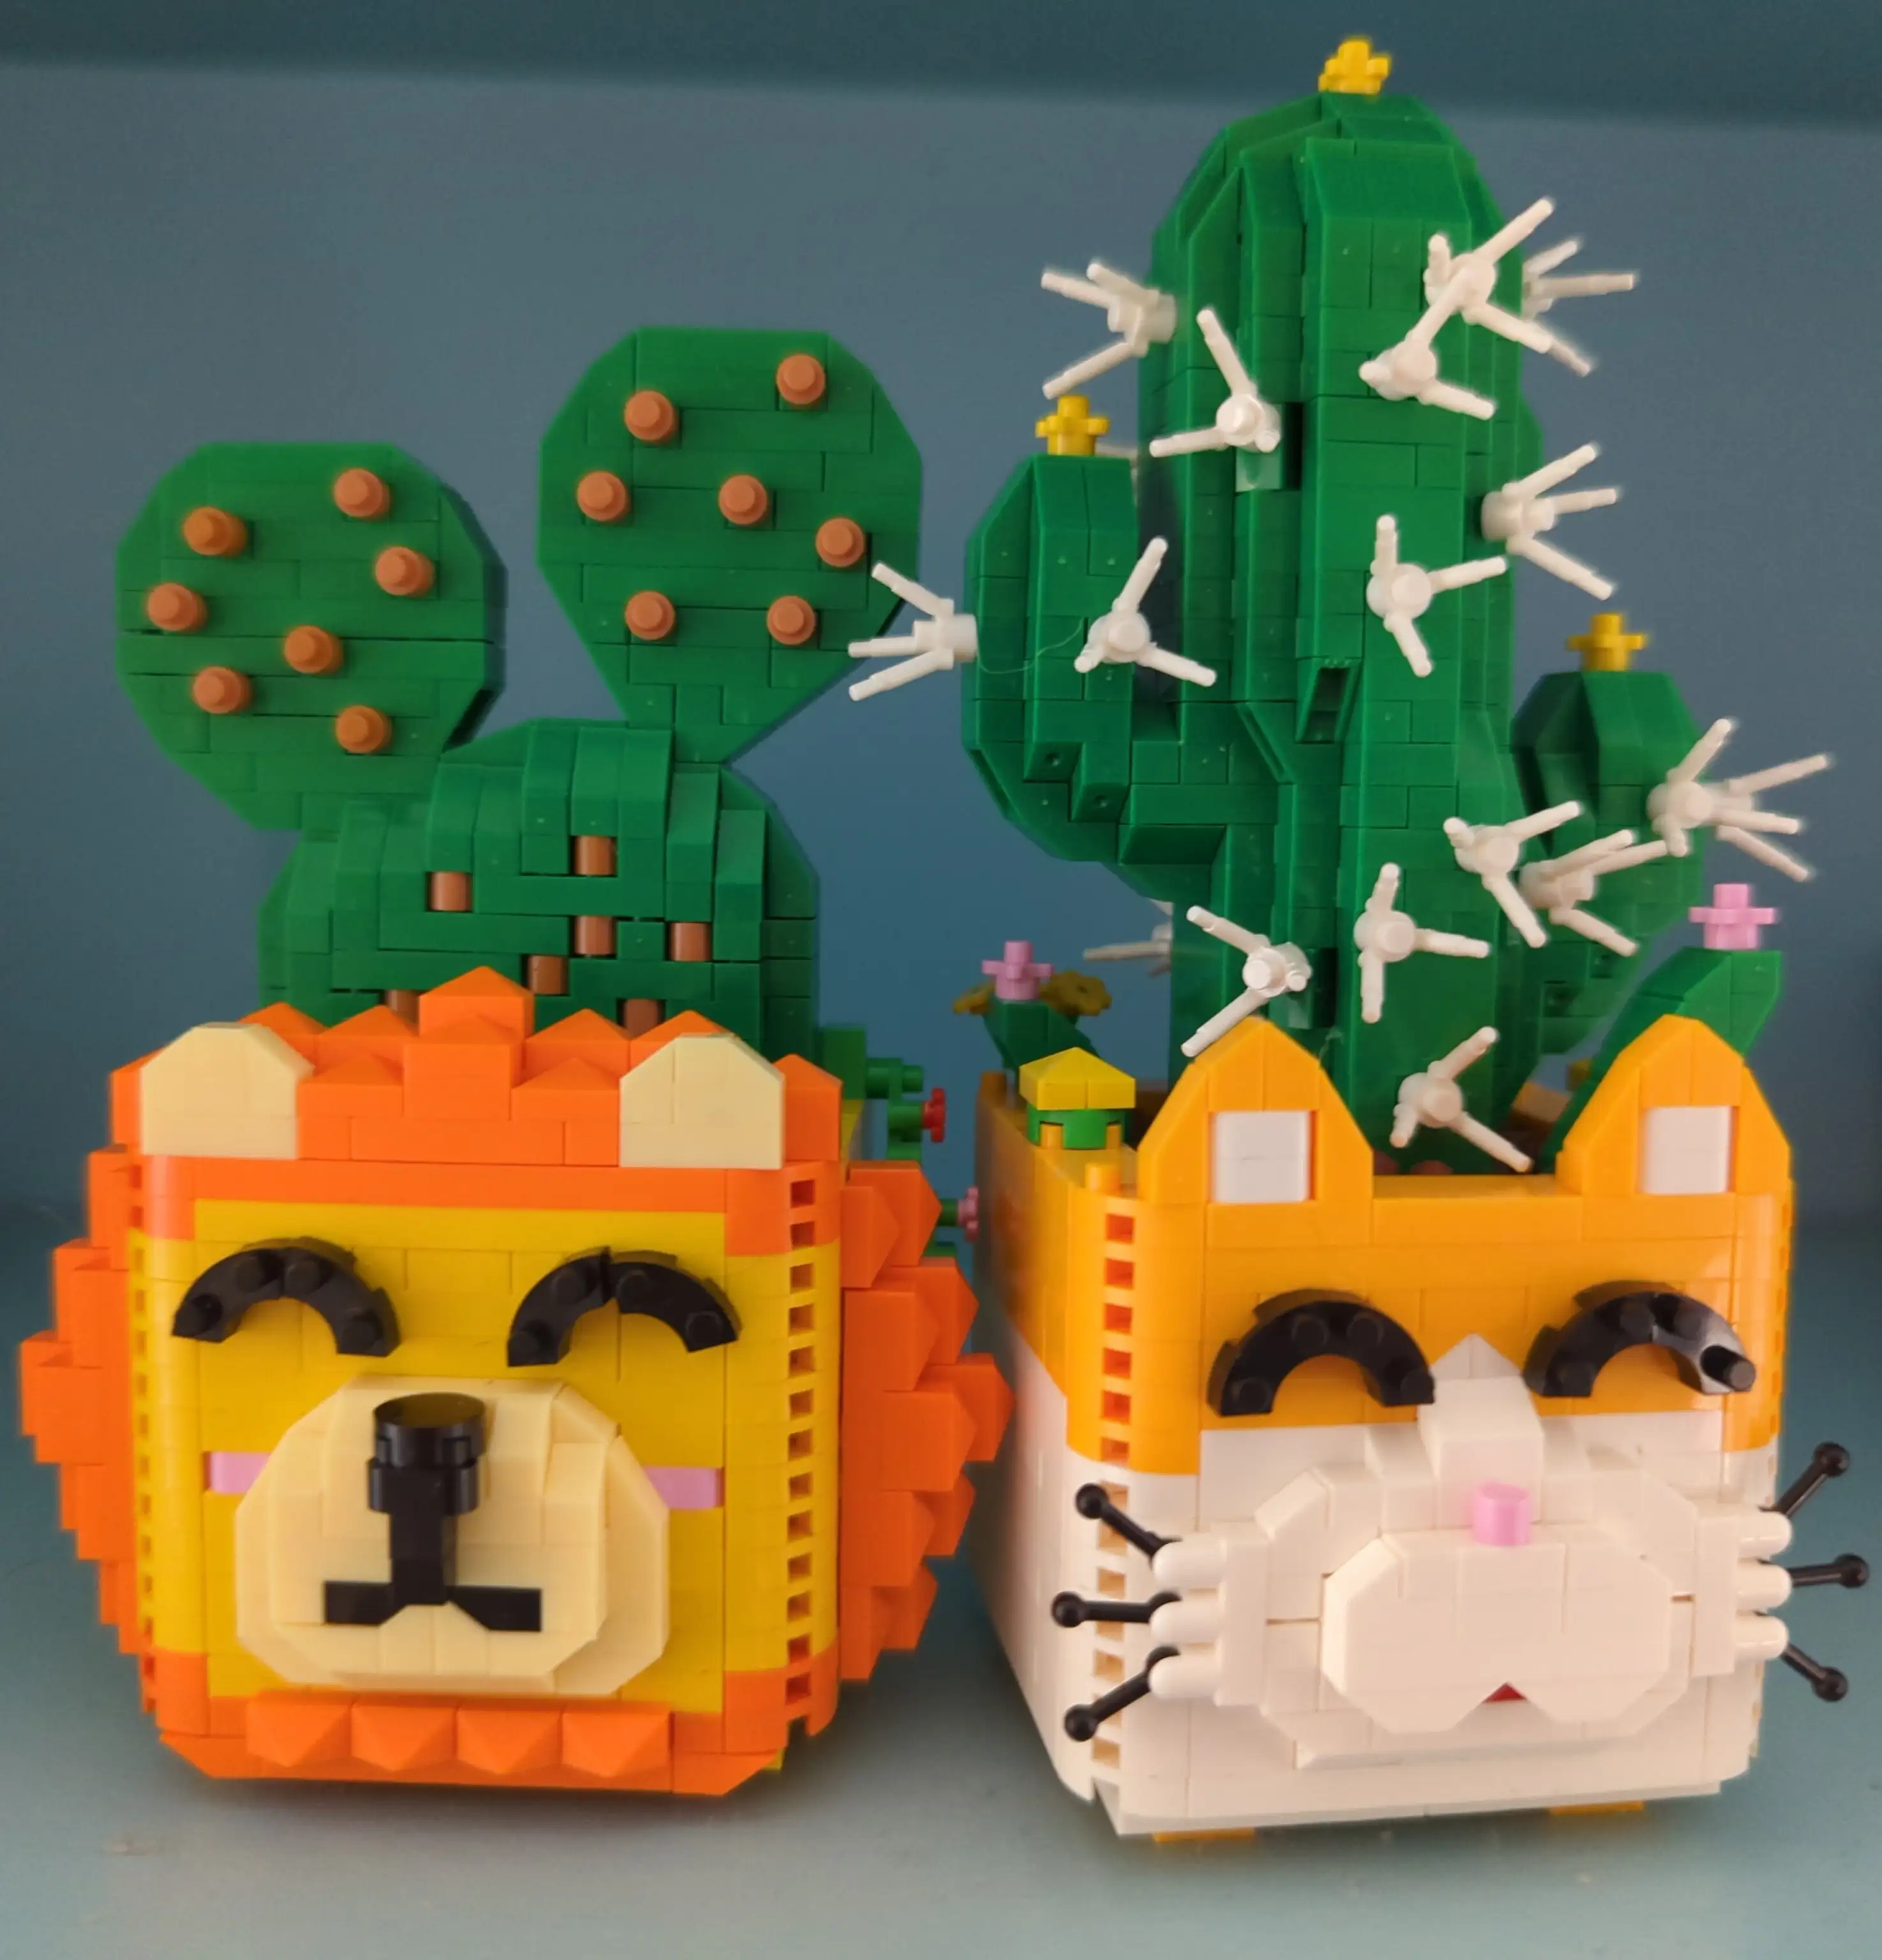 Two potted cacti, one pot lion-shaped, the other cat-shaped, made from very tiny studded bricks